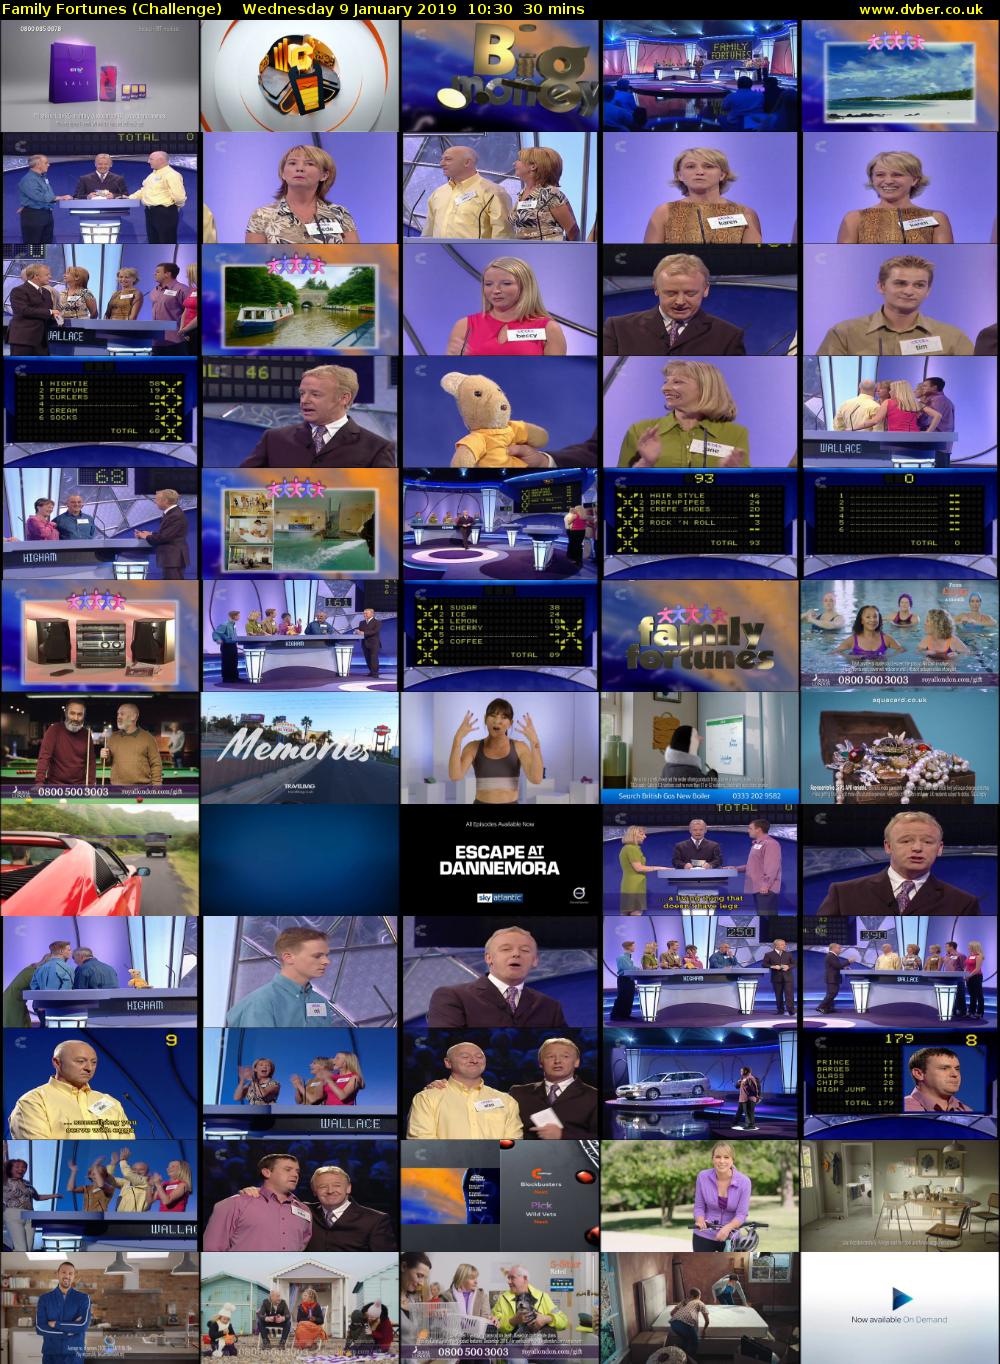 Family Fortunes (Challenge) Wednesday 9 January 2019 10:30 - 11:00